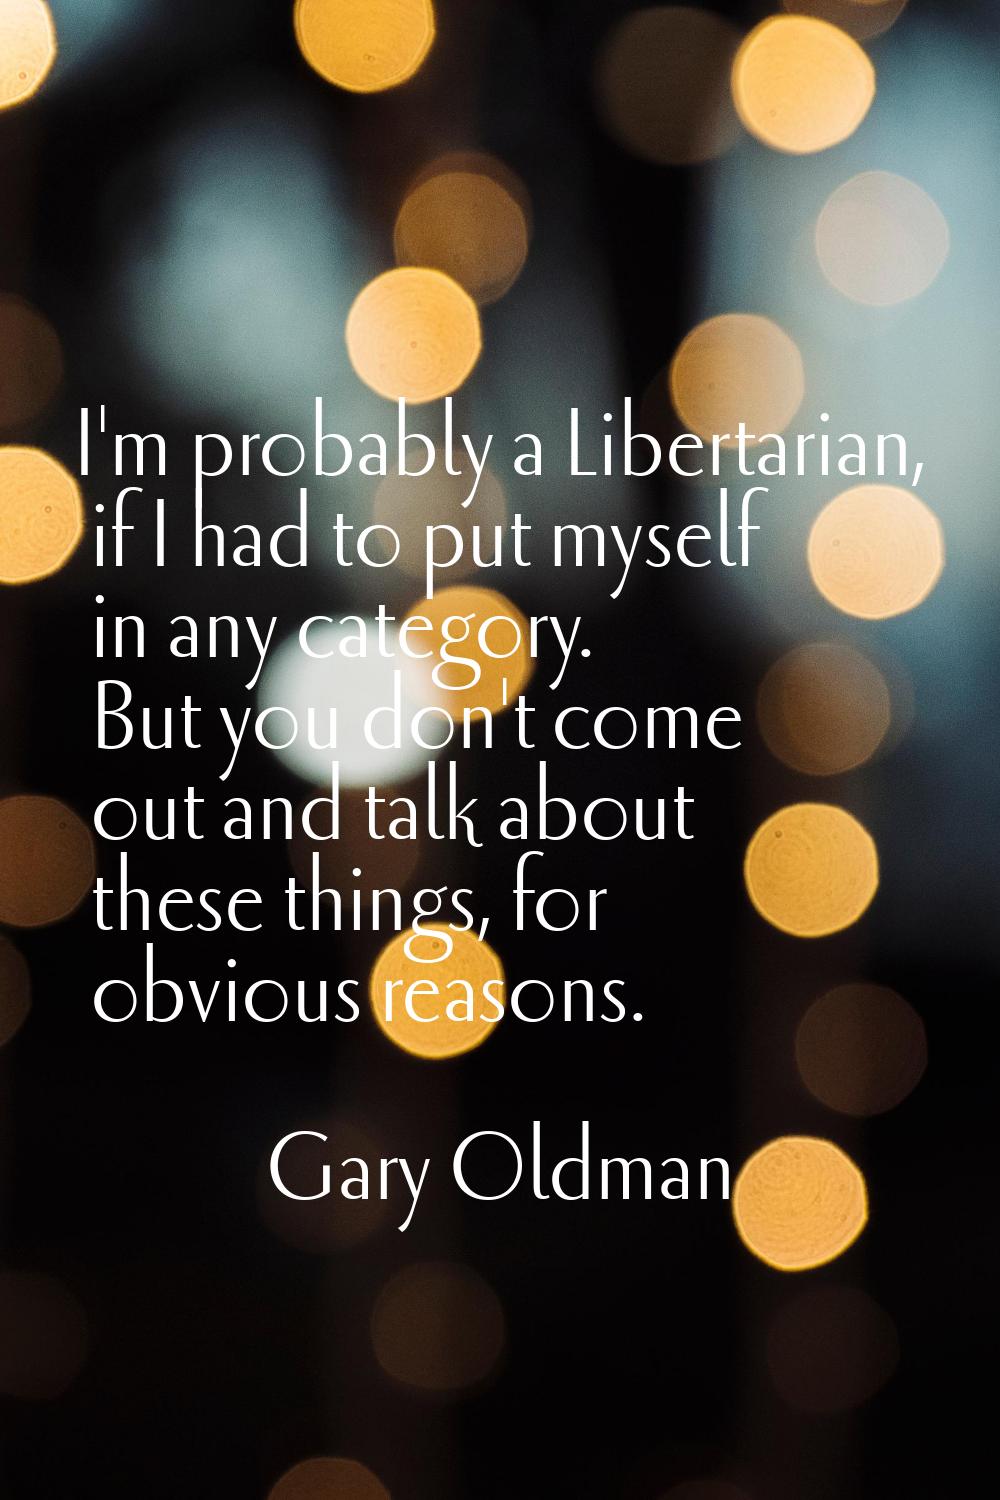 I'm probably a Libertarian, if I had to put myself in any category. But you don't come out and talk